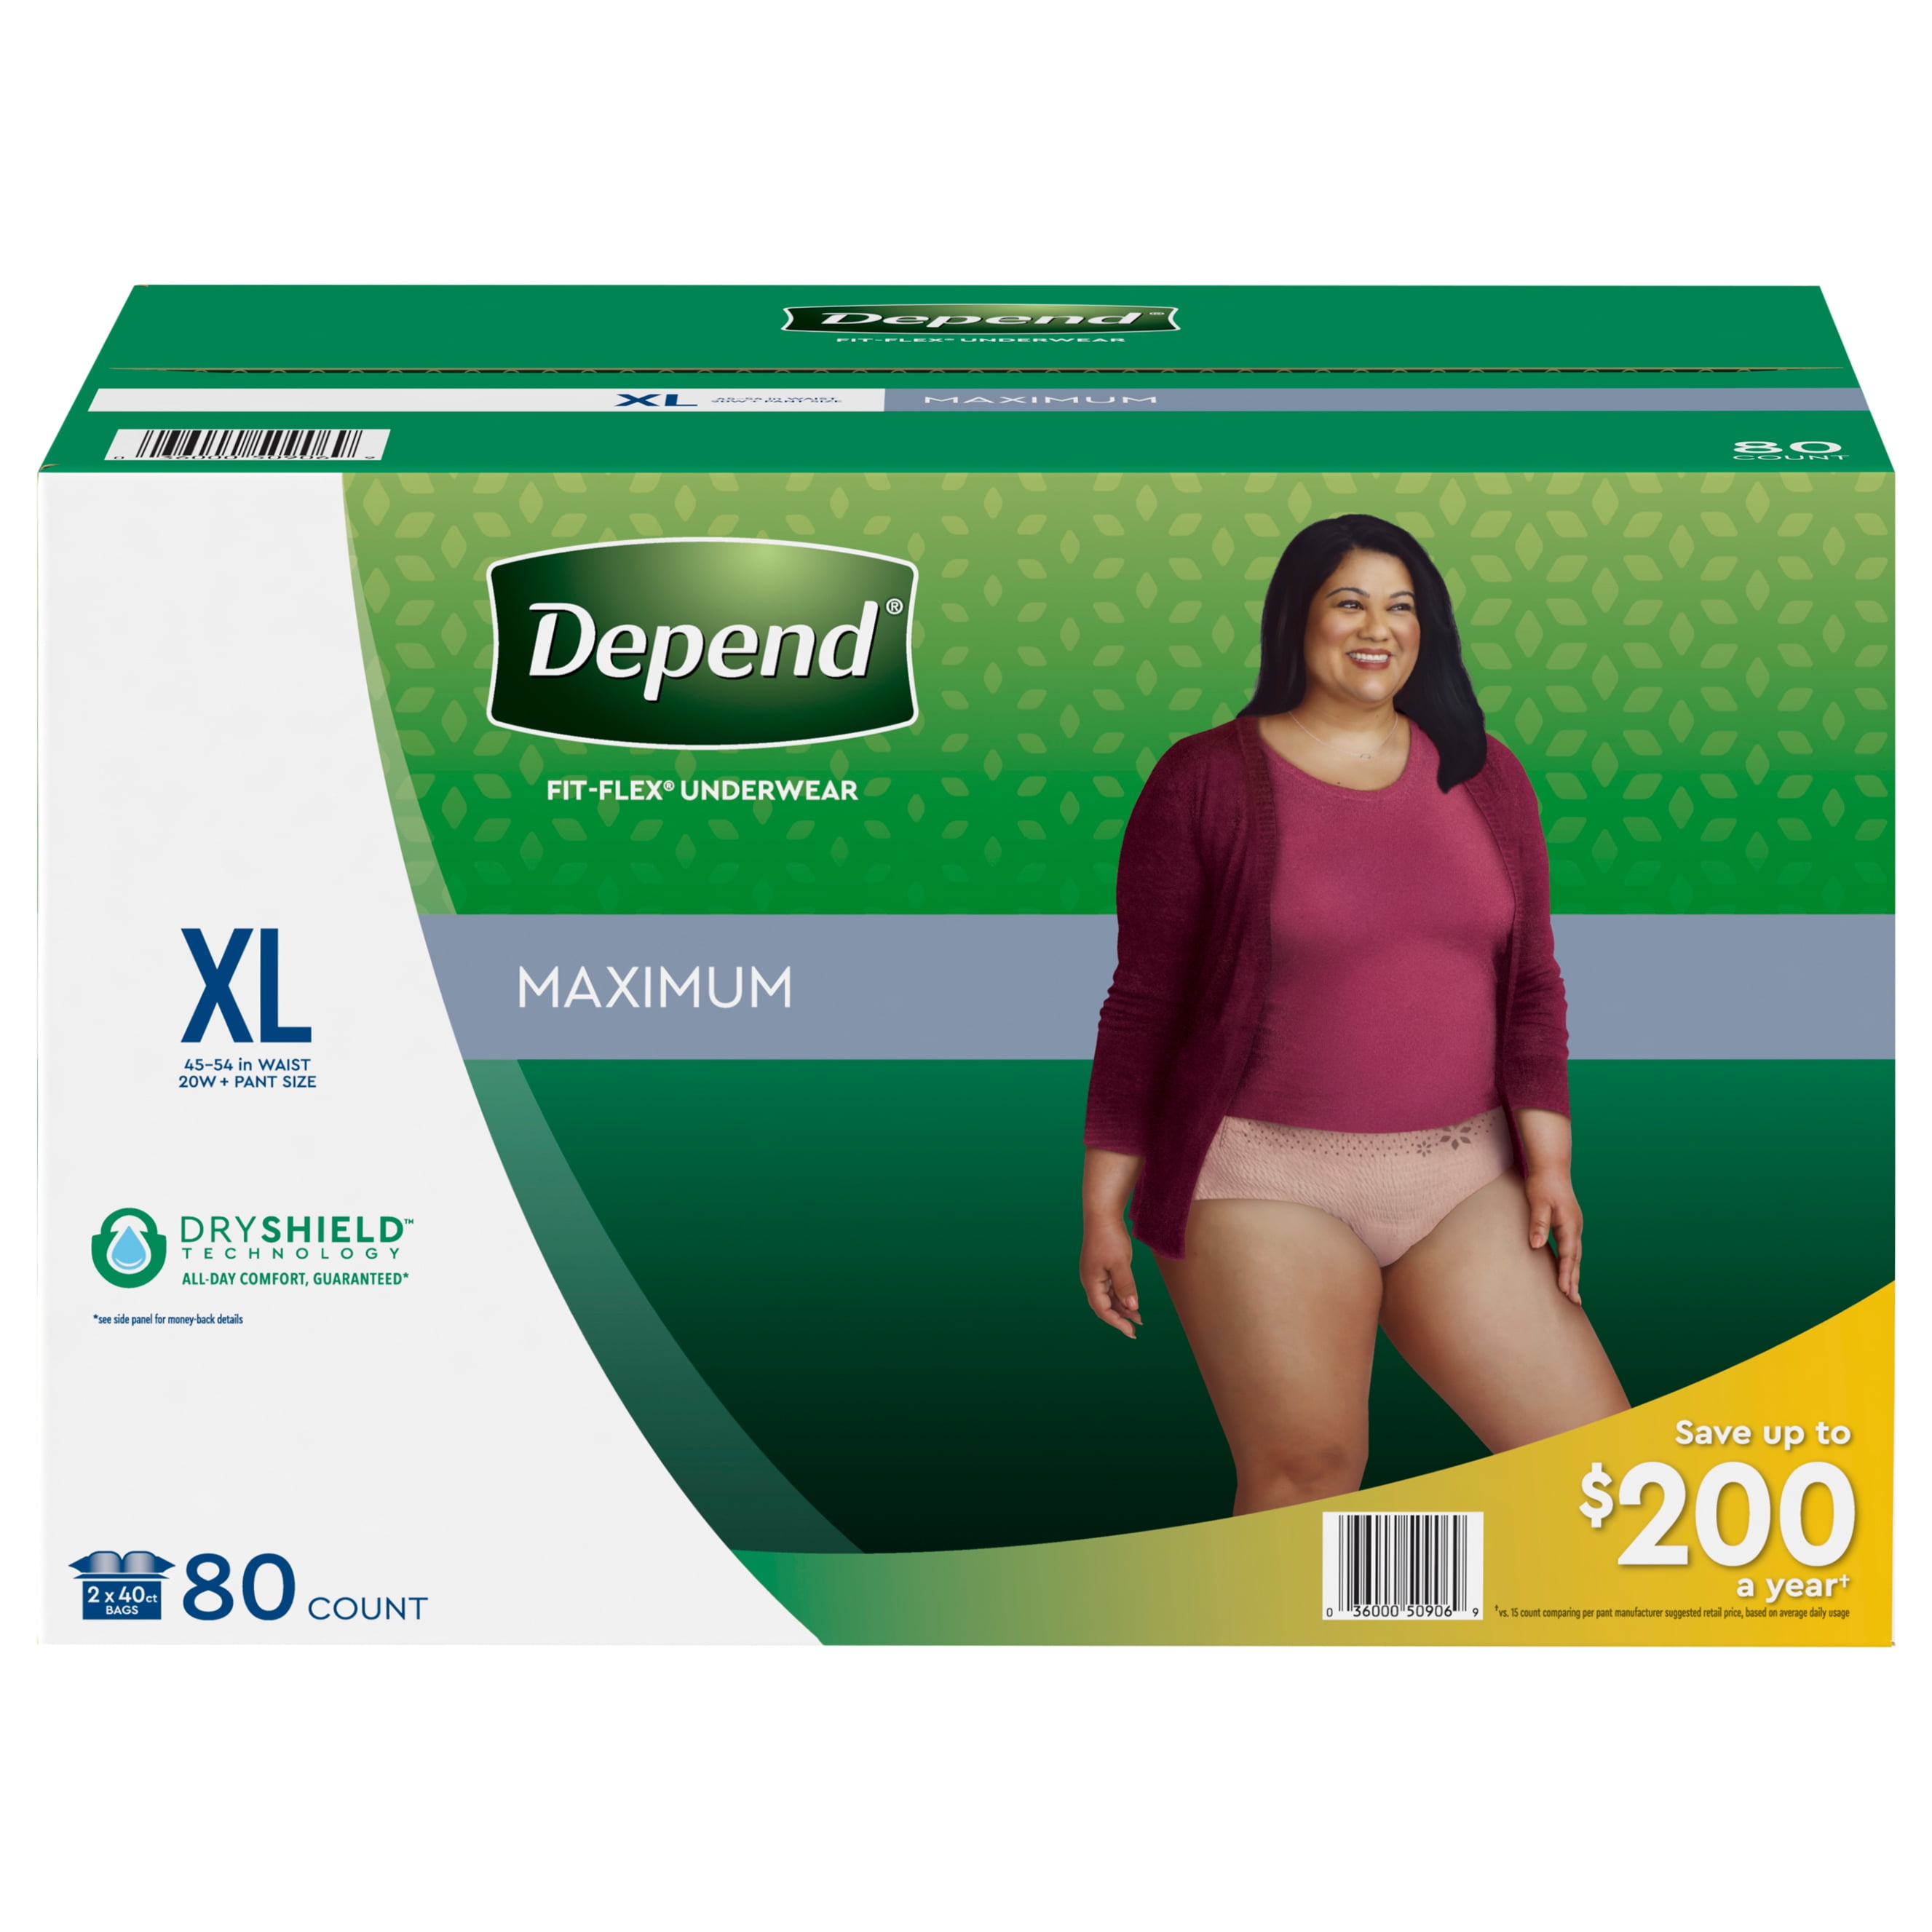 Depend Protection Plus Underwear for Women, Ultimate Absorbency, X-Large,  80 ct